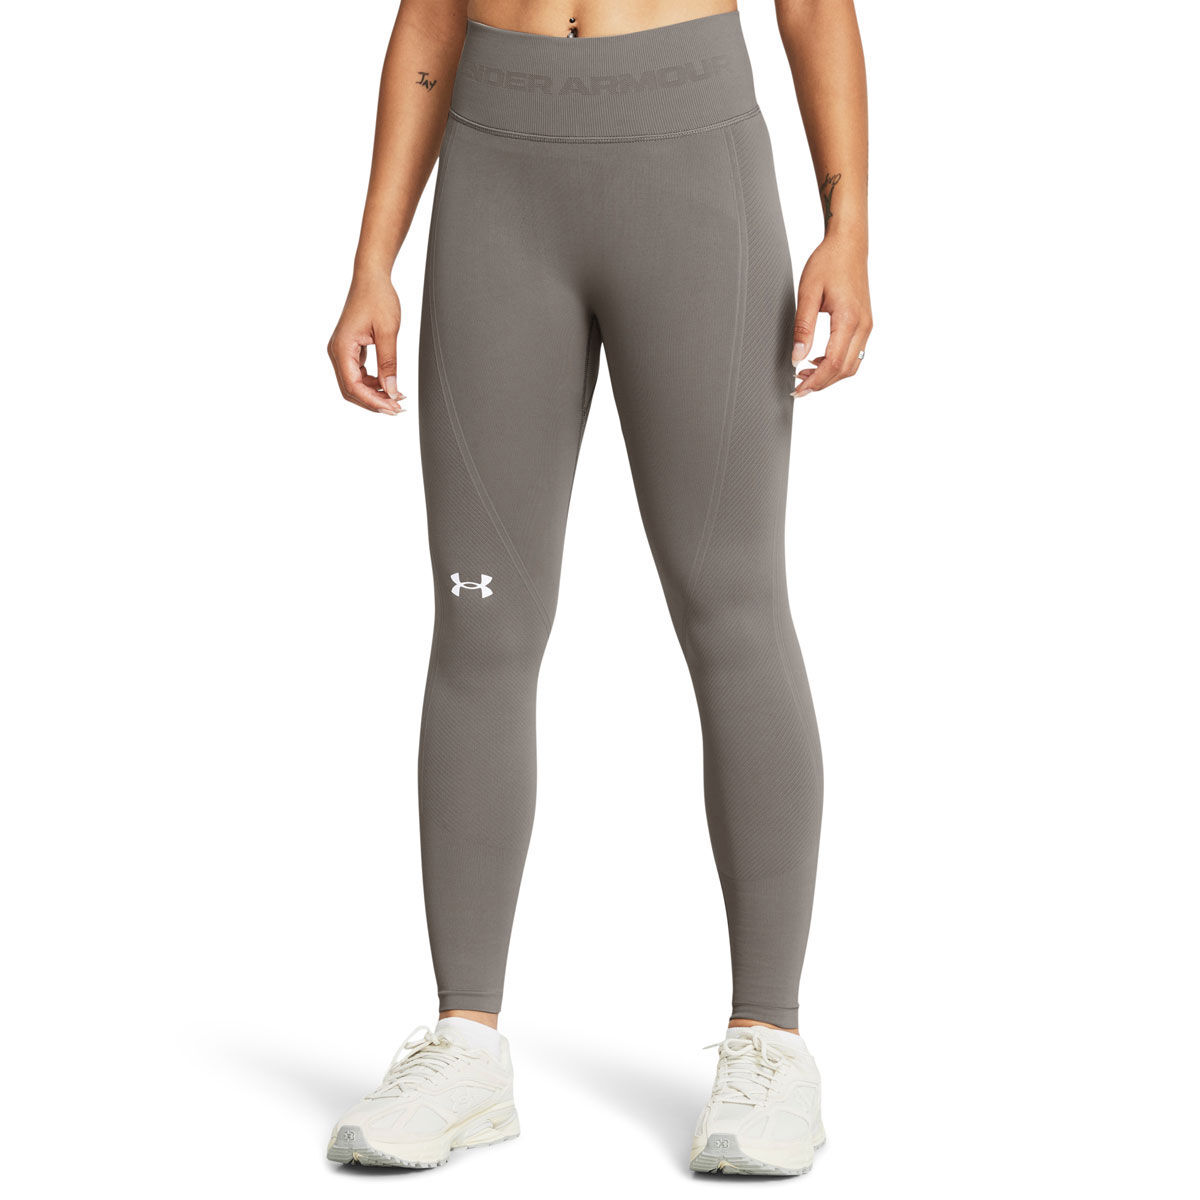 Under Armour Womens Train Seamless Full Length Tights, , rebel_hi-res